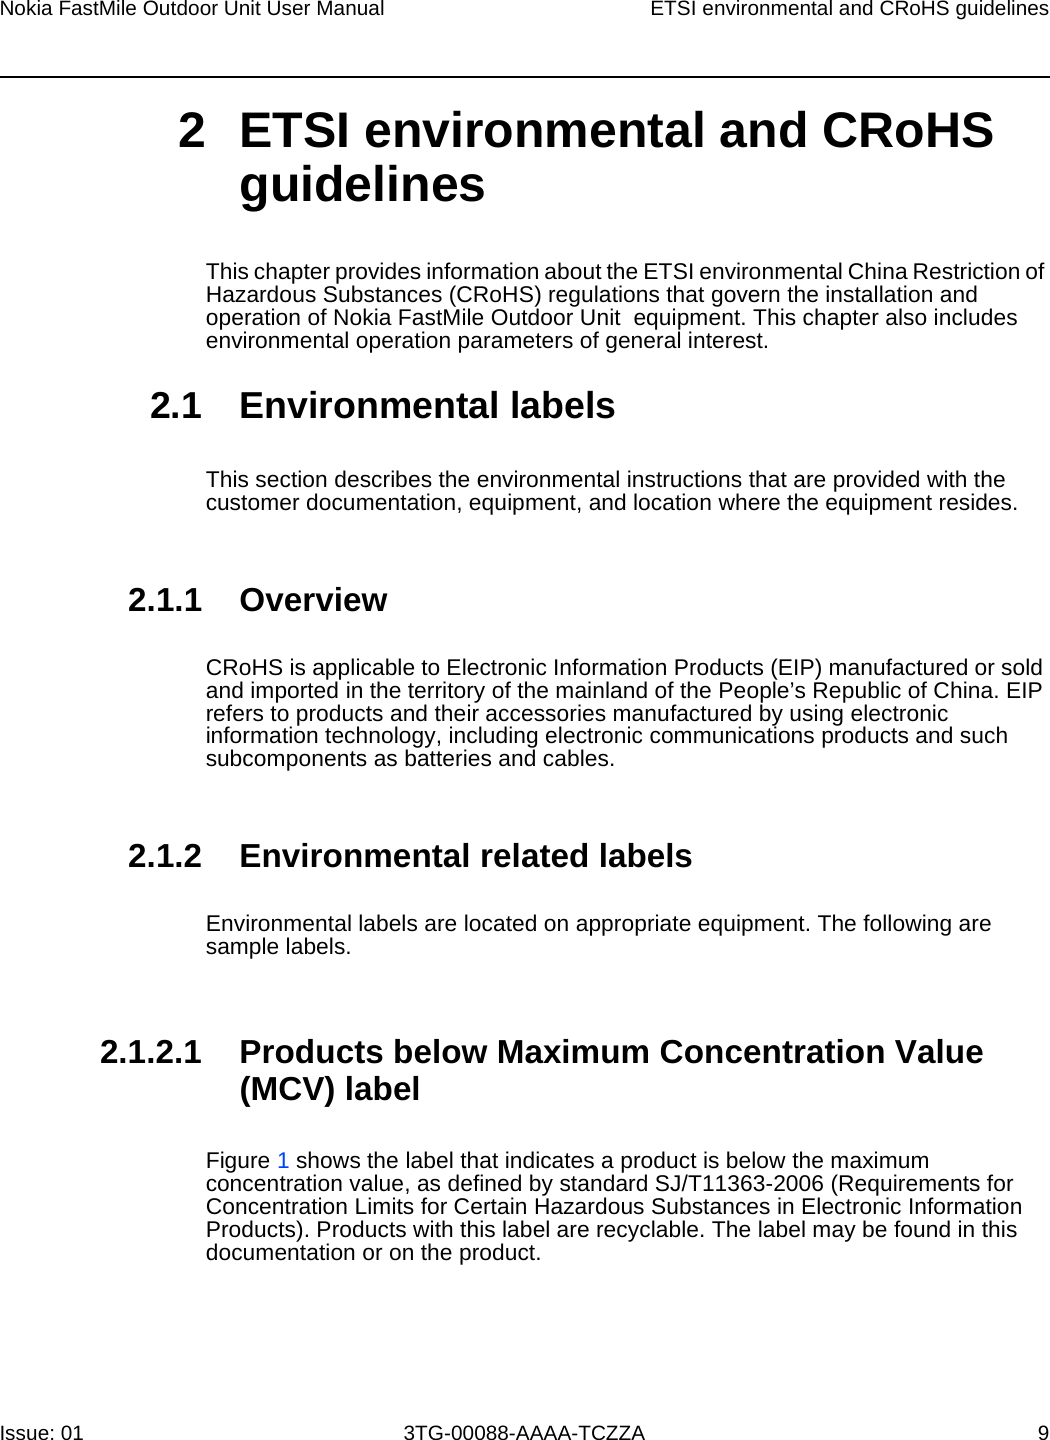 Nokia FastMile Outdoor Unit User Manual ETSI environmental and CRoHS guidelinesIssue: 01 3TG-00088-AAAA-TCZZA 9 2 ETSI environmental and CRoHS guidelinesThis chapter provides information about the ETSI environmental China Restriction of Hazardous Substances (CRoHS) regulations that govern the installation and operation of Nokia FastMile Outdoor Unit  equipment. This chapter also includes environmental operation parameters of general interest. 2.1 Environmental labelsThis section describes the environmental instructions that are provided with the customer documentation, equipment, and location where the equipment resides.2.1.1 OverviewCRoHS is applicable to Electronic Information Products (EIP) manufactured or sold and imported in the territory of the mainland of the People’s Republic of China. EIP refers to products and their accessories manufactured by using electronic information technology, including electronic communications products and such subcomponents as batteries and cables.2.1.2 Environmental related labelsEnvironmental labels are located on appropriate equipment. The following are sample labels.2.1.2.1 Products below Maximum Concentration Value (MCV) labelFigure 1 shows the label that indicates a product is below the maximum concentration value, as defined by standard SJ/T11363-2006 (Requirements for Concentration Limits for Certain Hazardous Substances in Electronic Information Products). Products with this label are recyclable. The label may be found in this documentation or on the product.